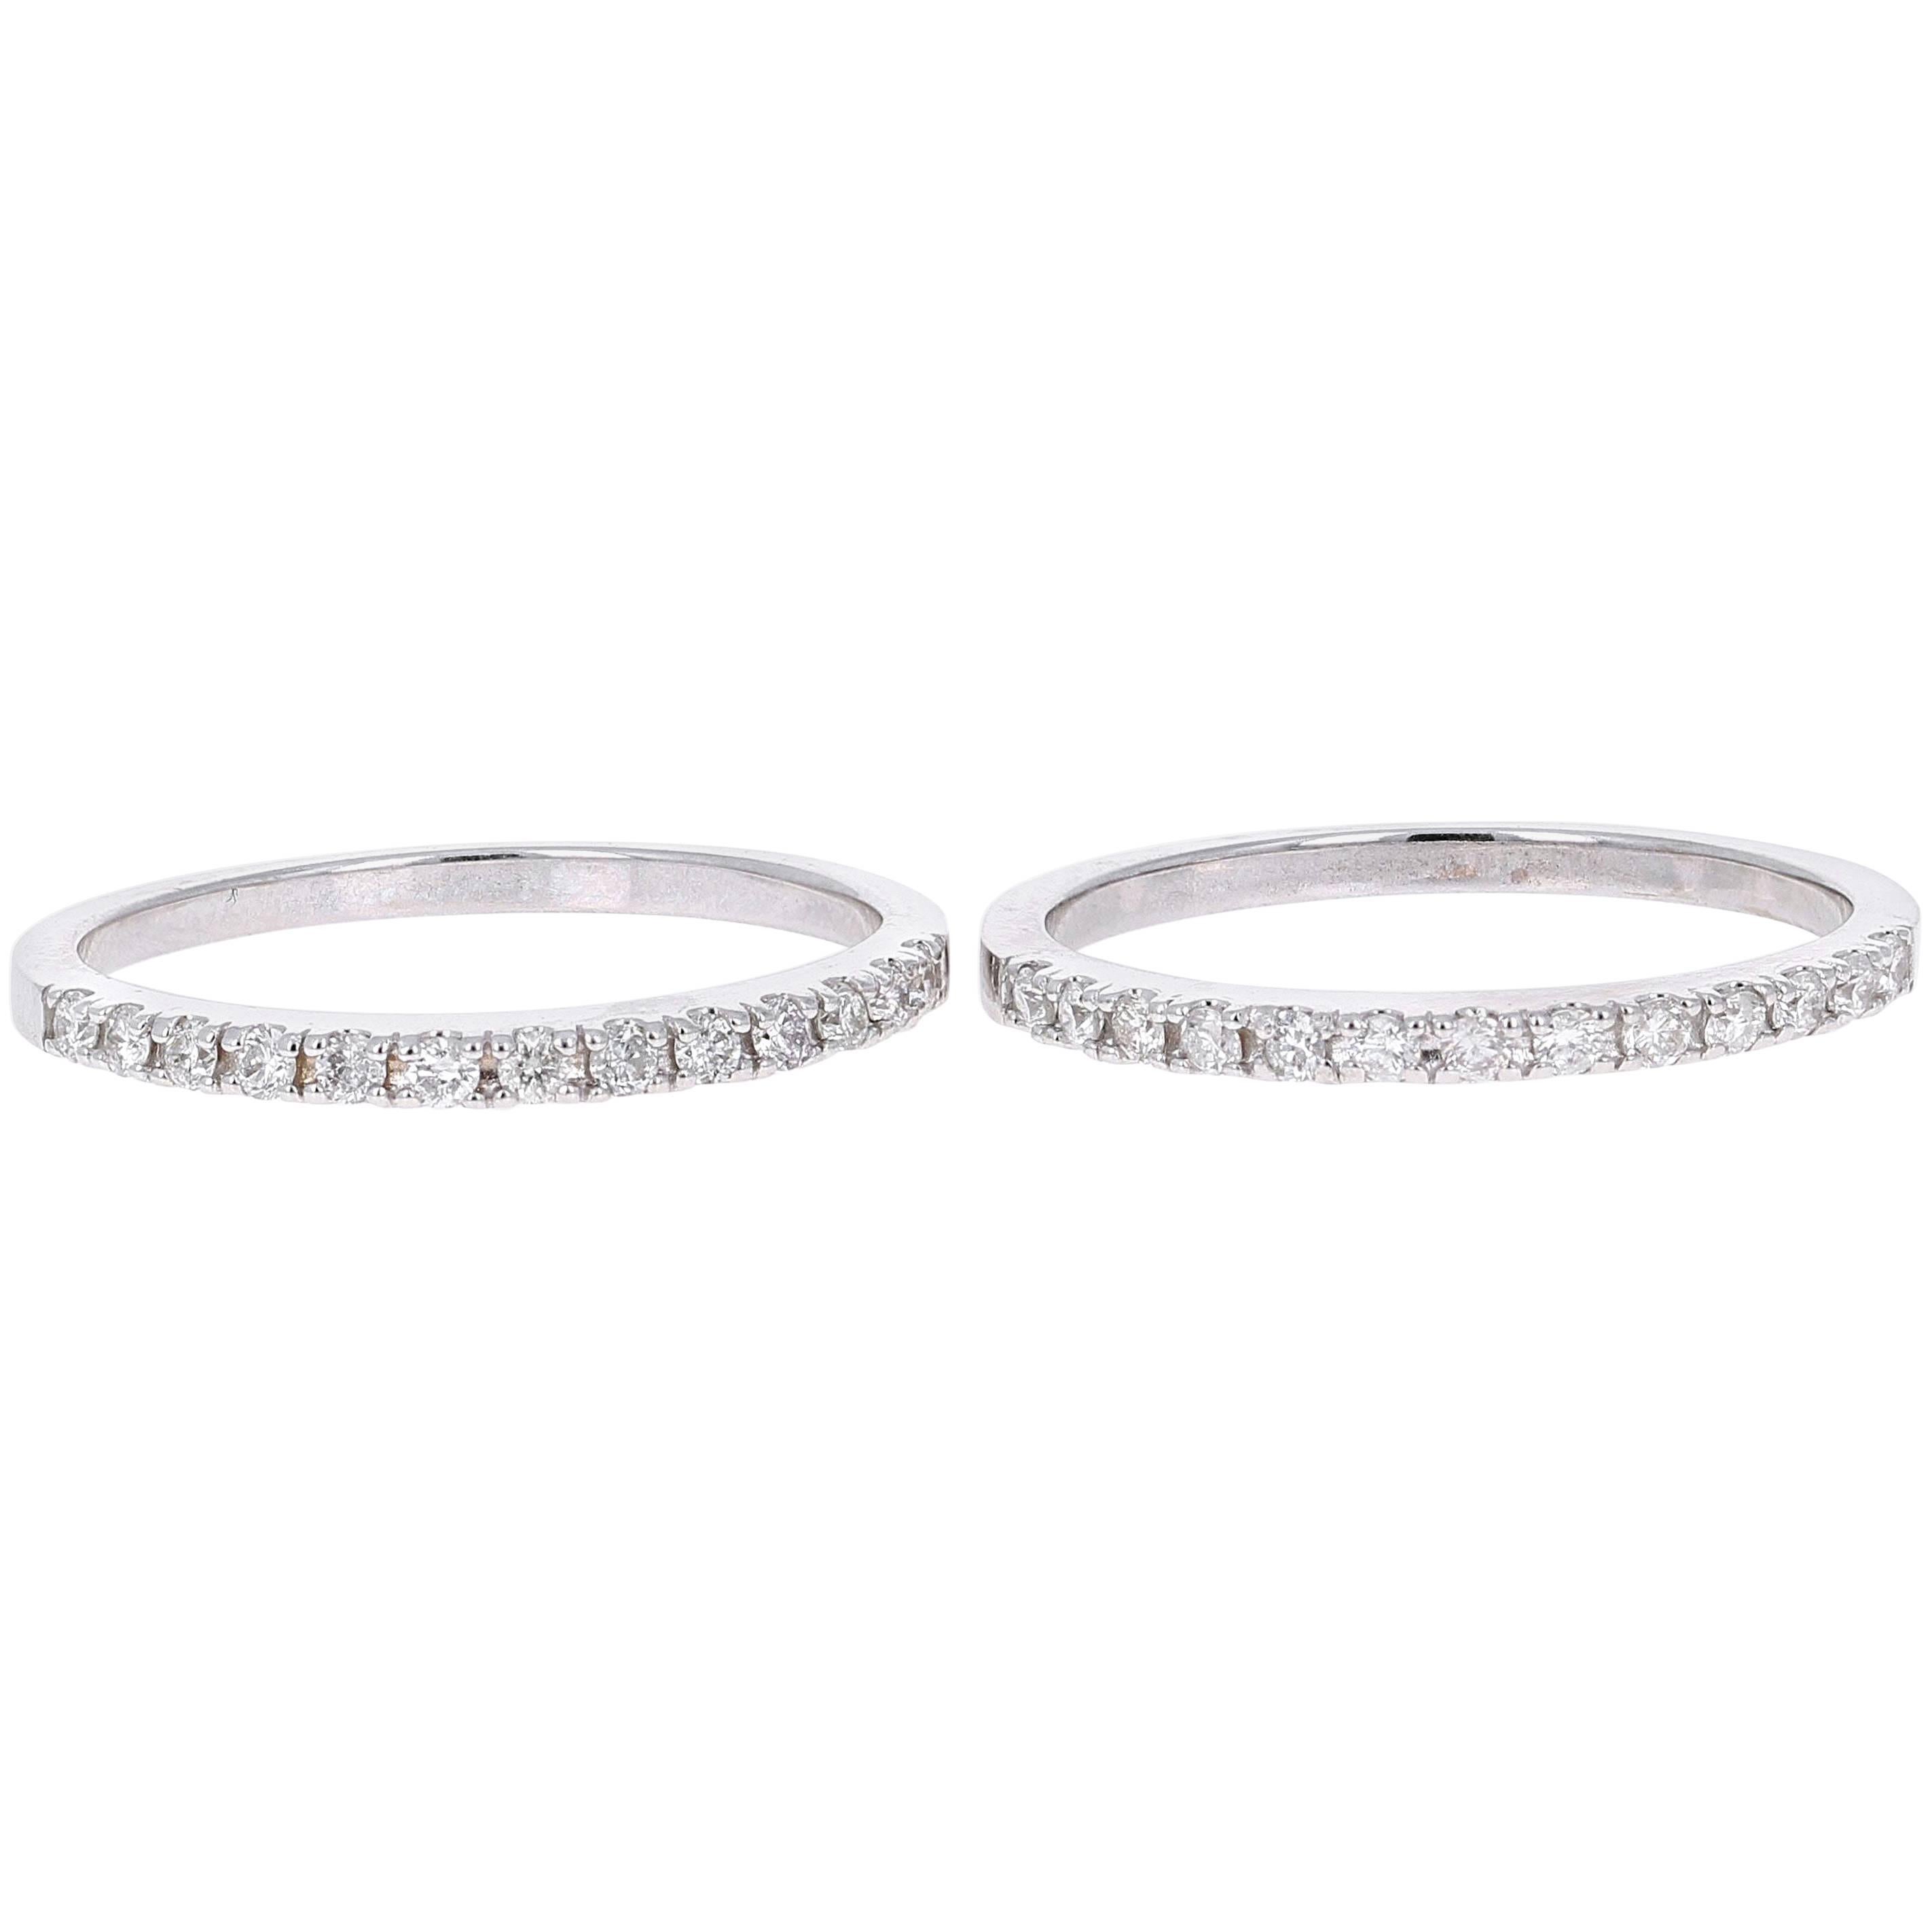 0.38 Carat Round Cut Diamond White Gold Stackable Bands